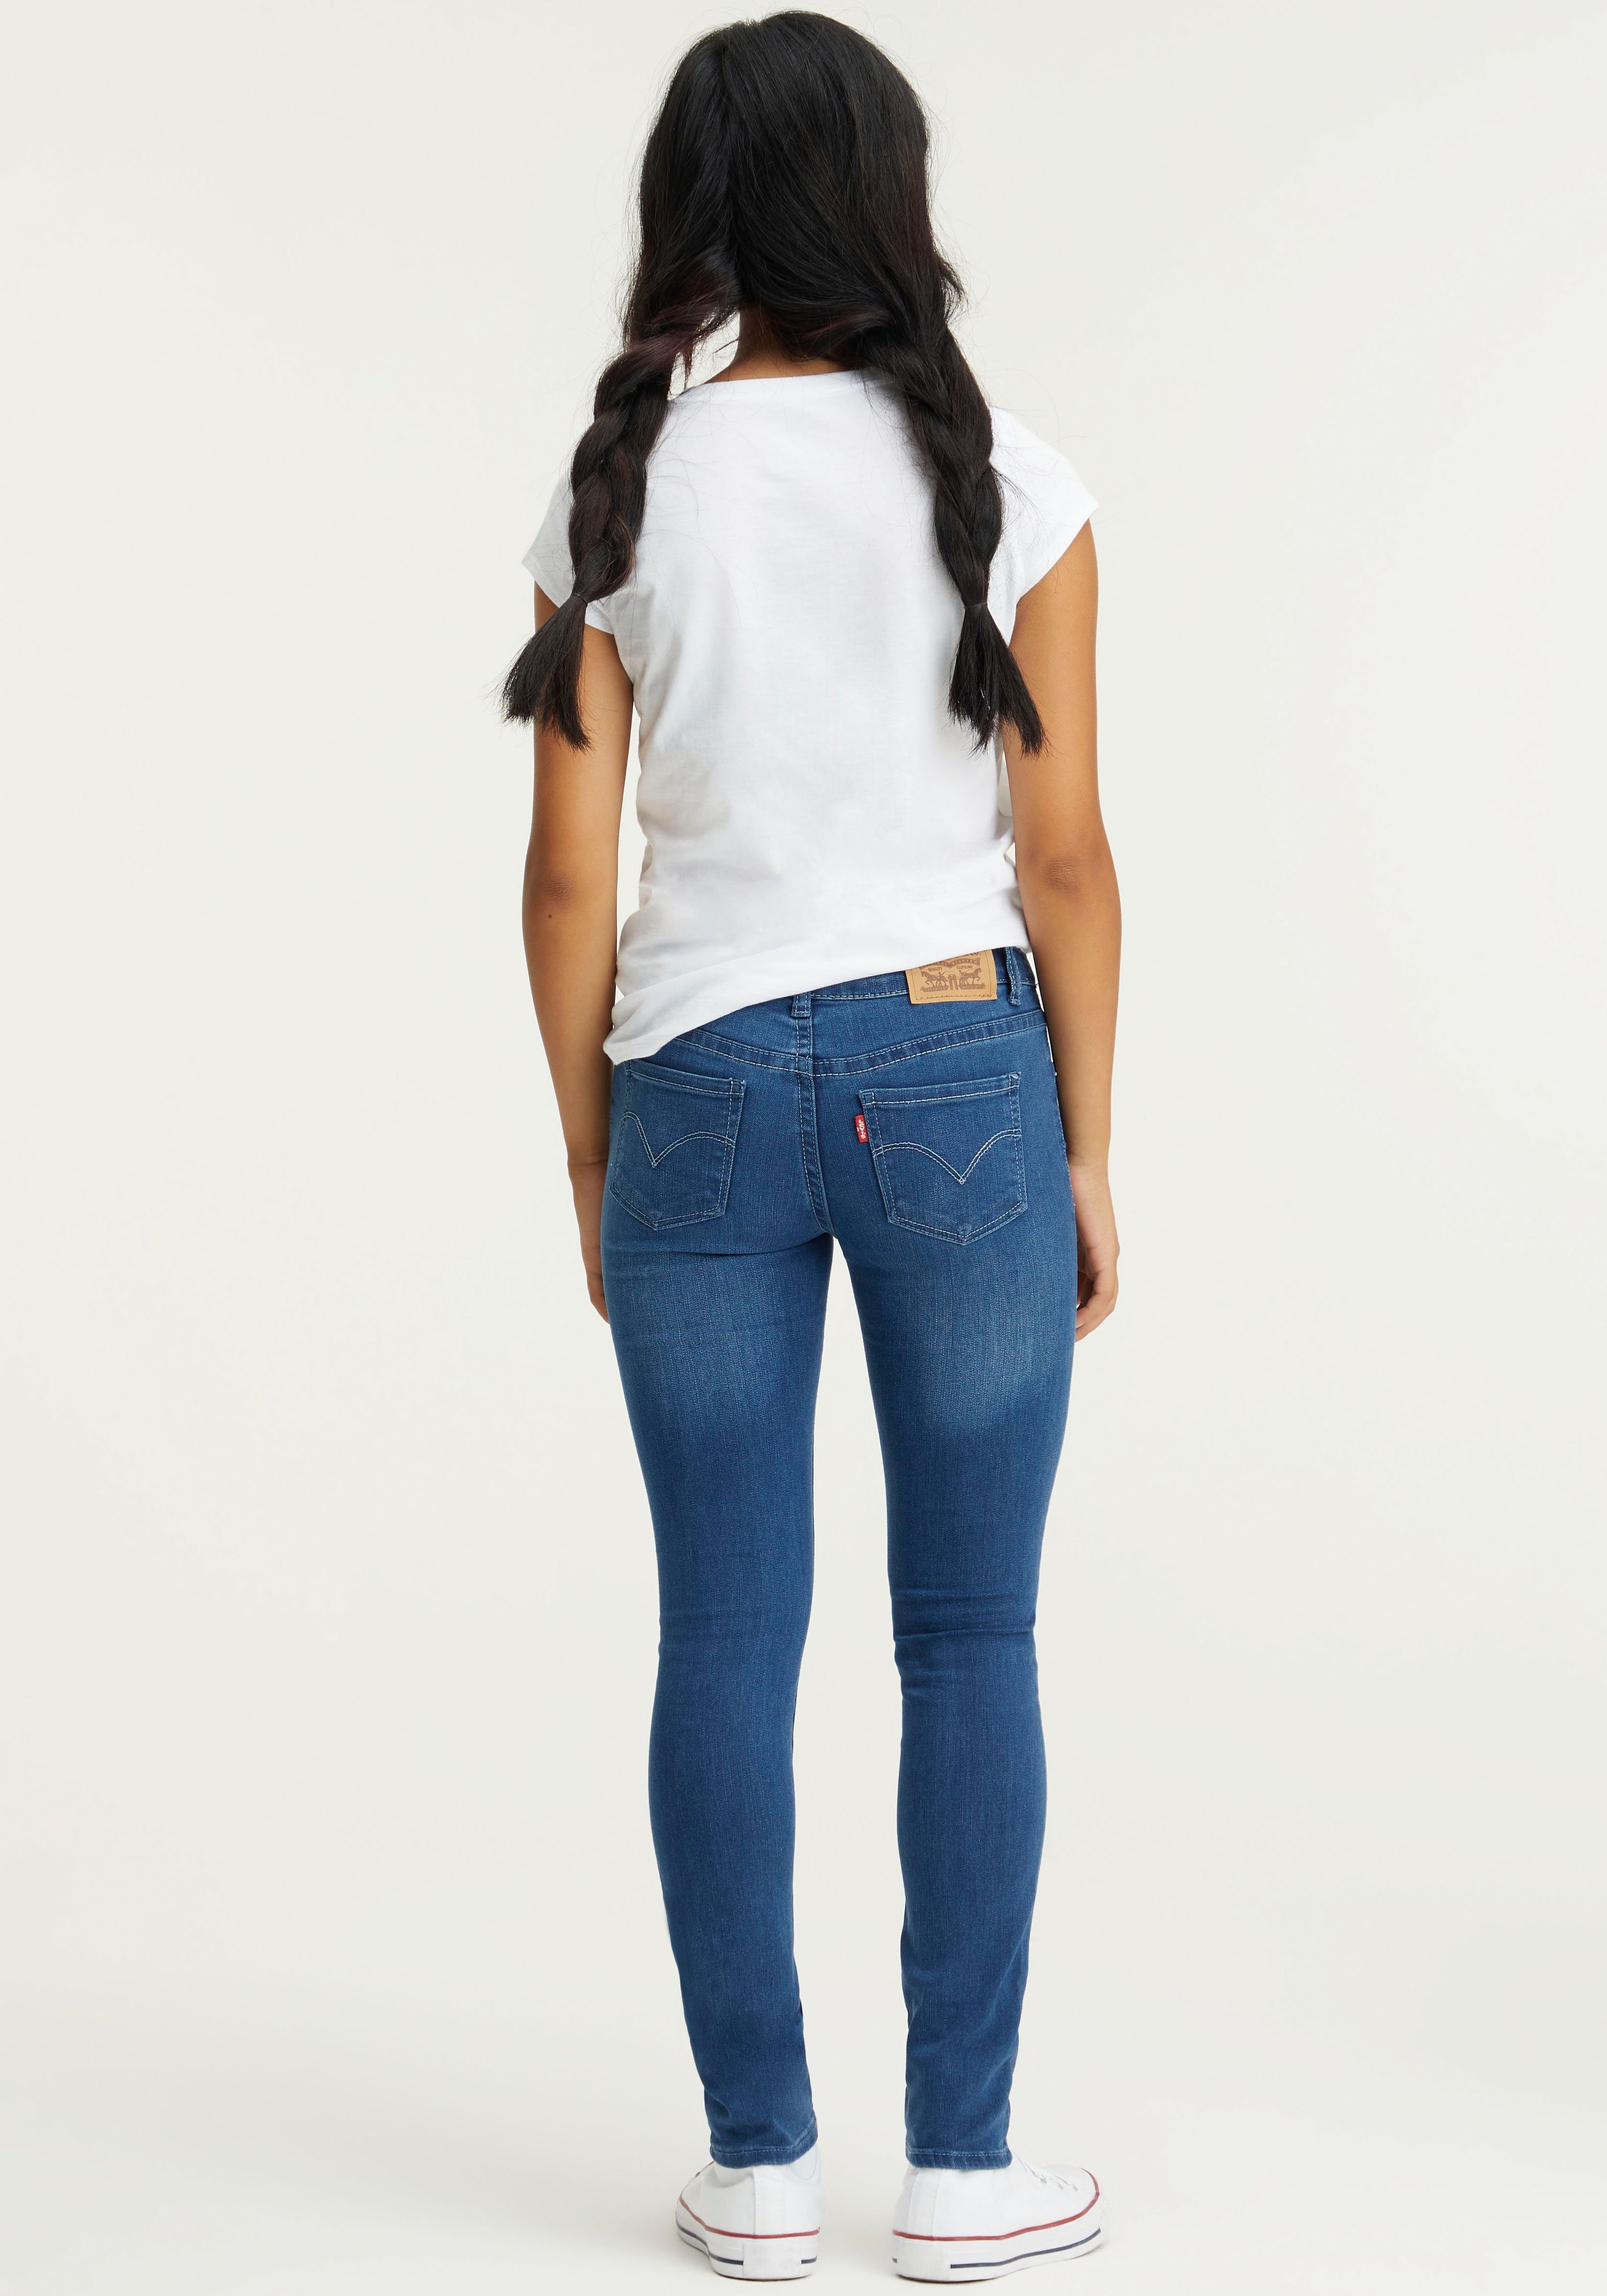 Stretch-Jeans 711™ for Levi's® JEANS SKINNY GIRLS Kids FIT